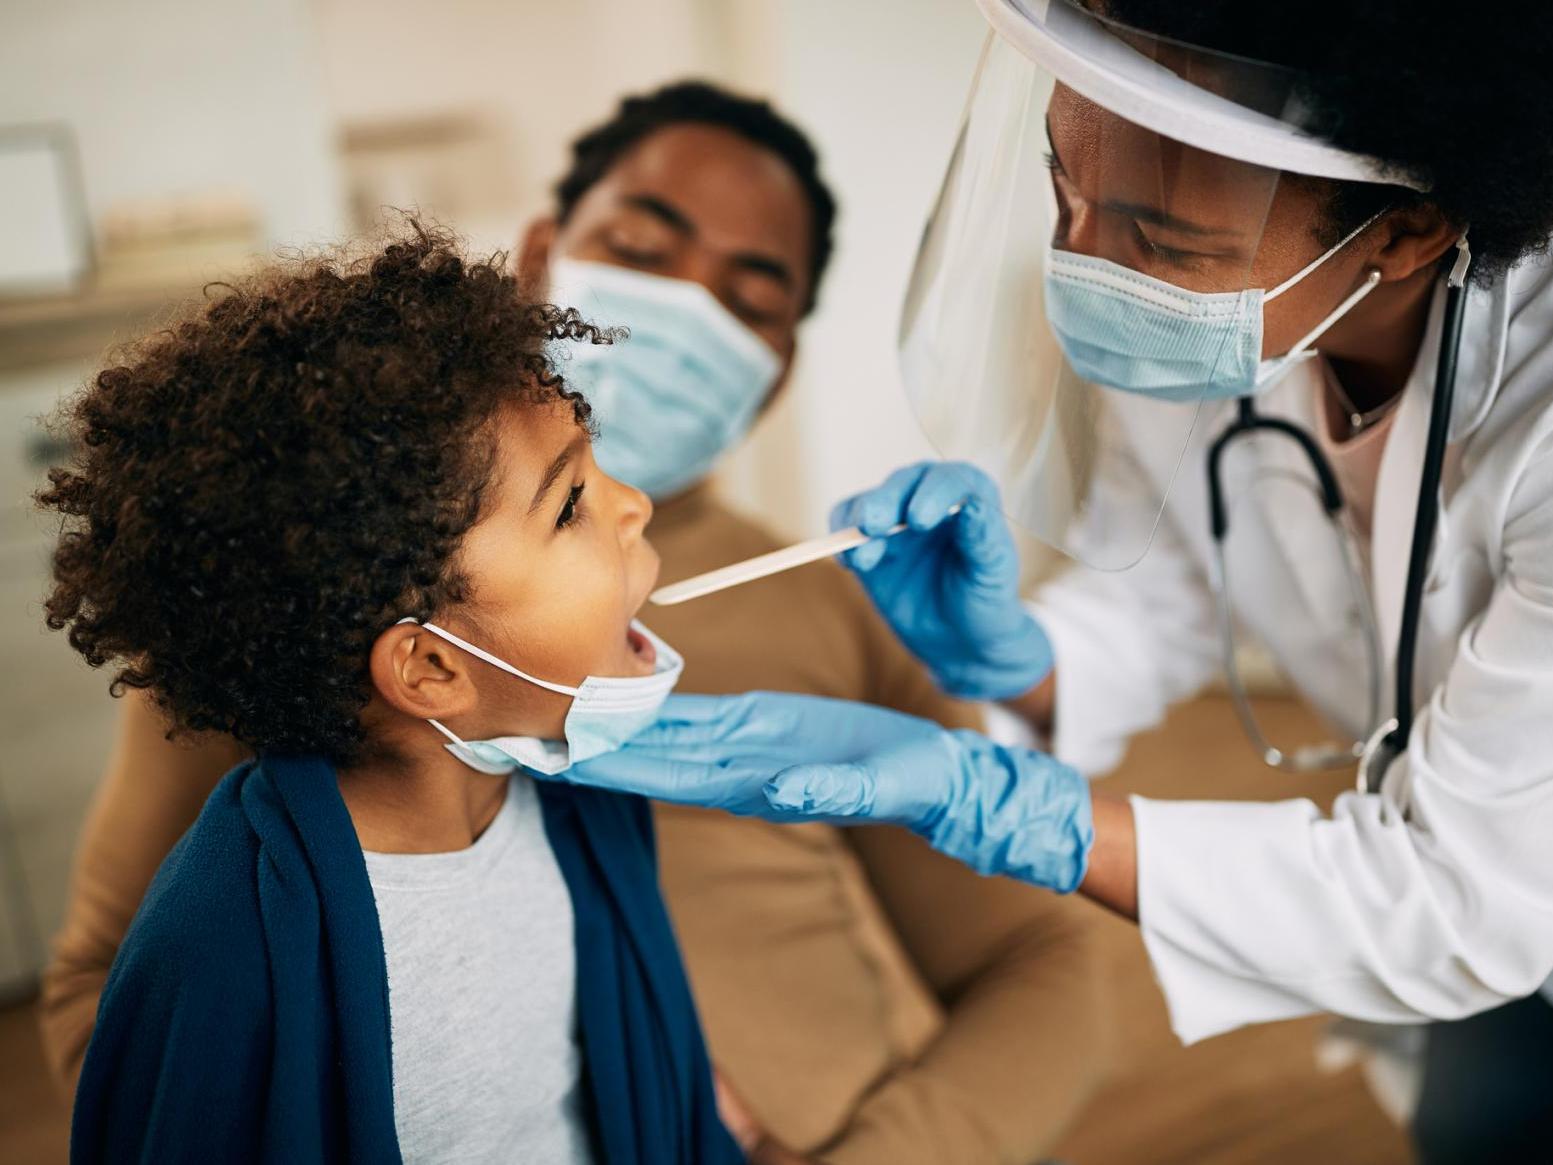 A young Black boy has his temperature taken by a Black female doctor